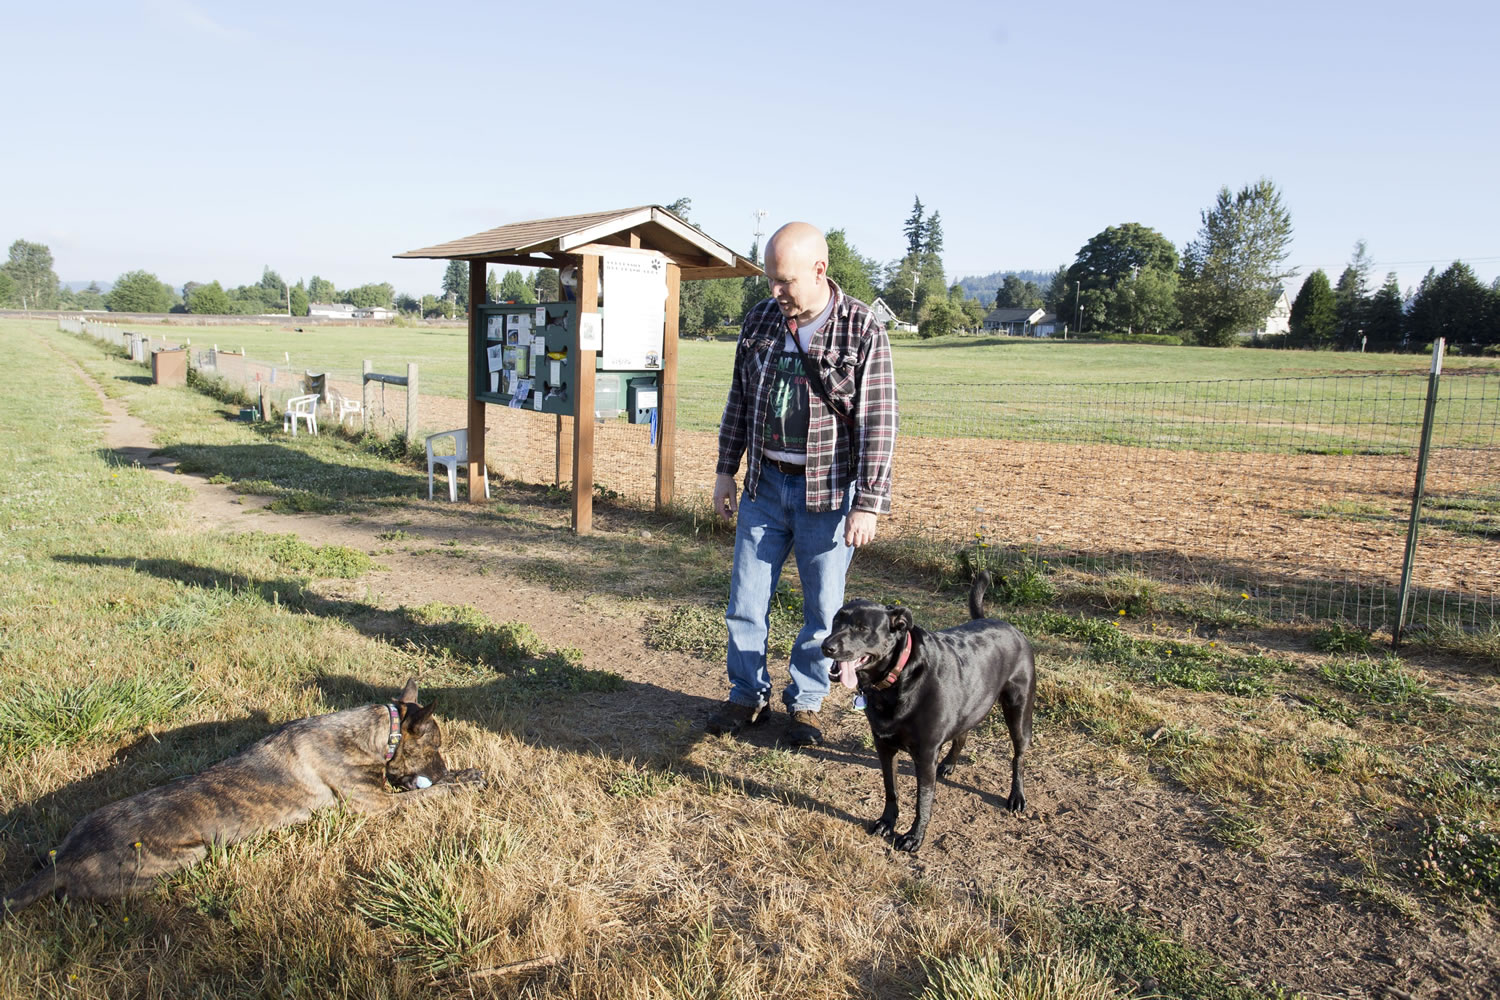 David Clarke, volunteer manager of Washougal's Stevenson Off-Leash Dog Area, lets his dogs Chinook, left, and Lakota run free at the property.